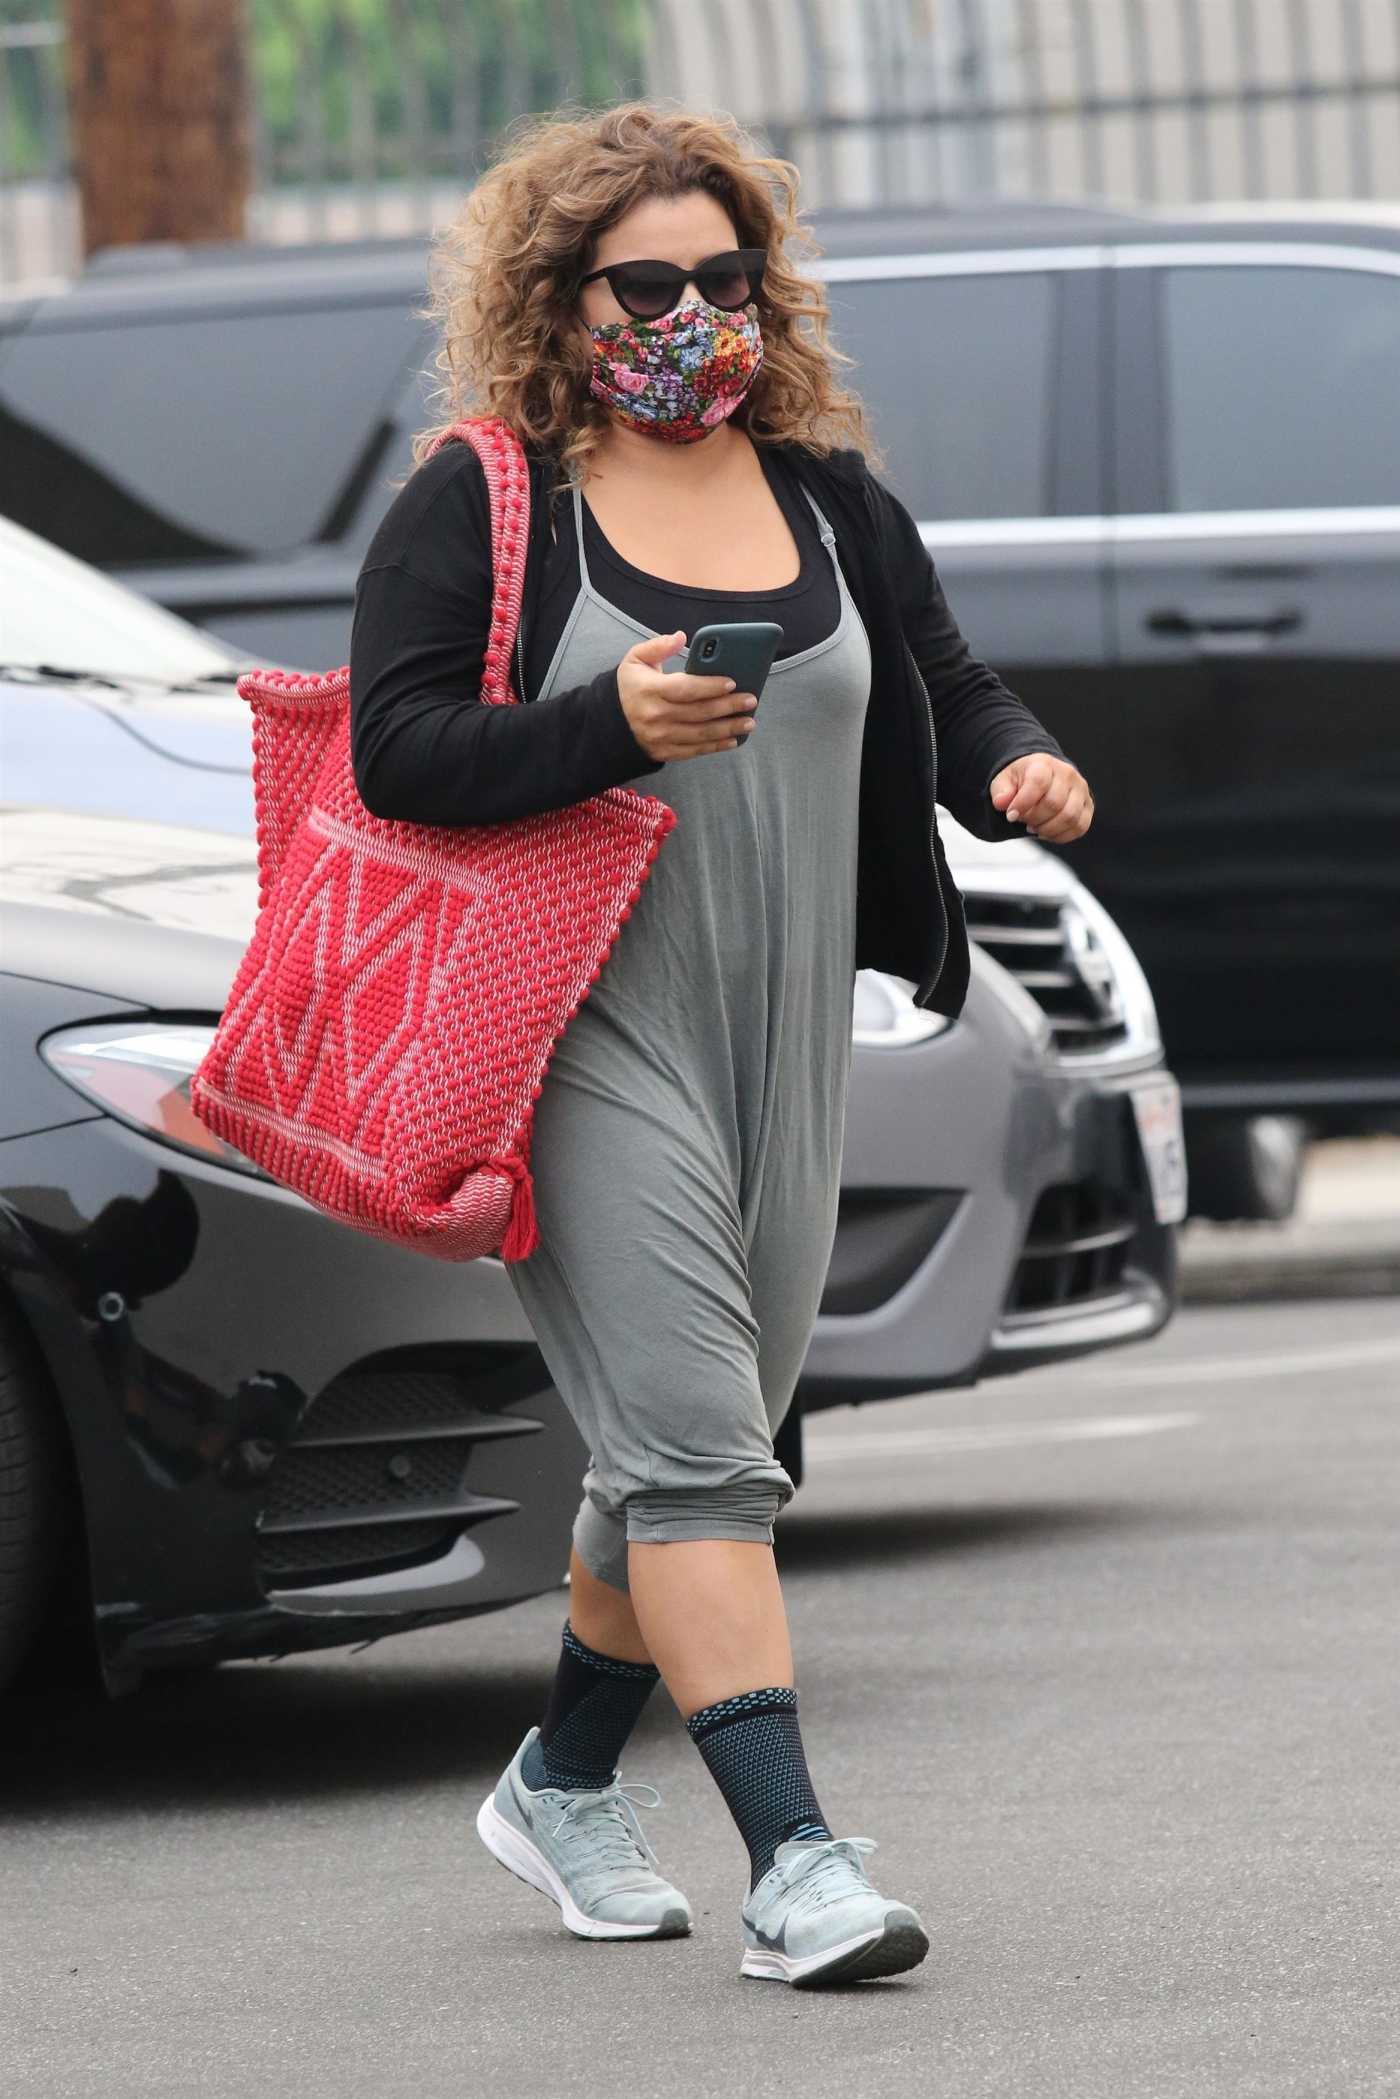 Justina Machado in a Protective Mask Arrives at the DWTS Studio in Los Angeles 09/11/2020